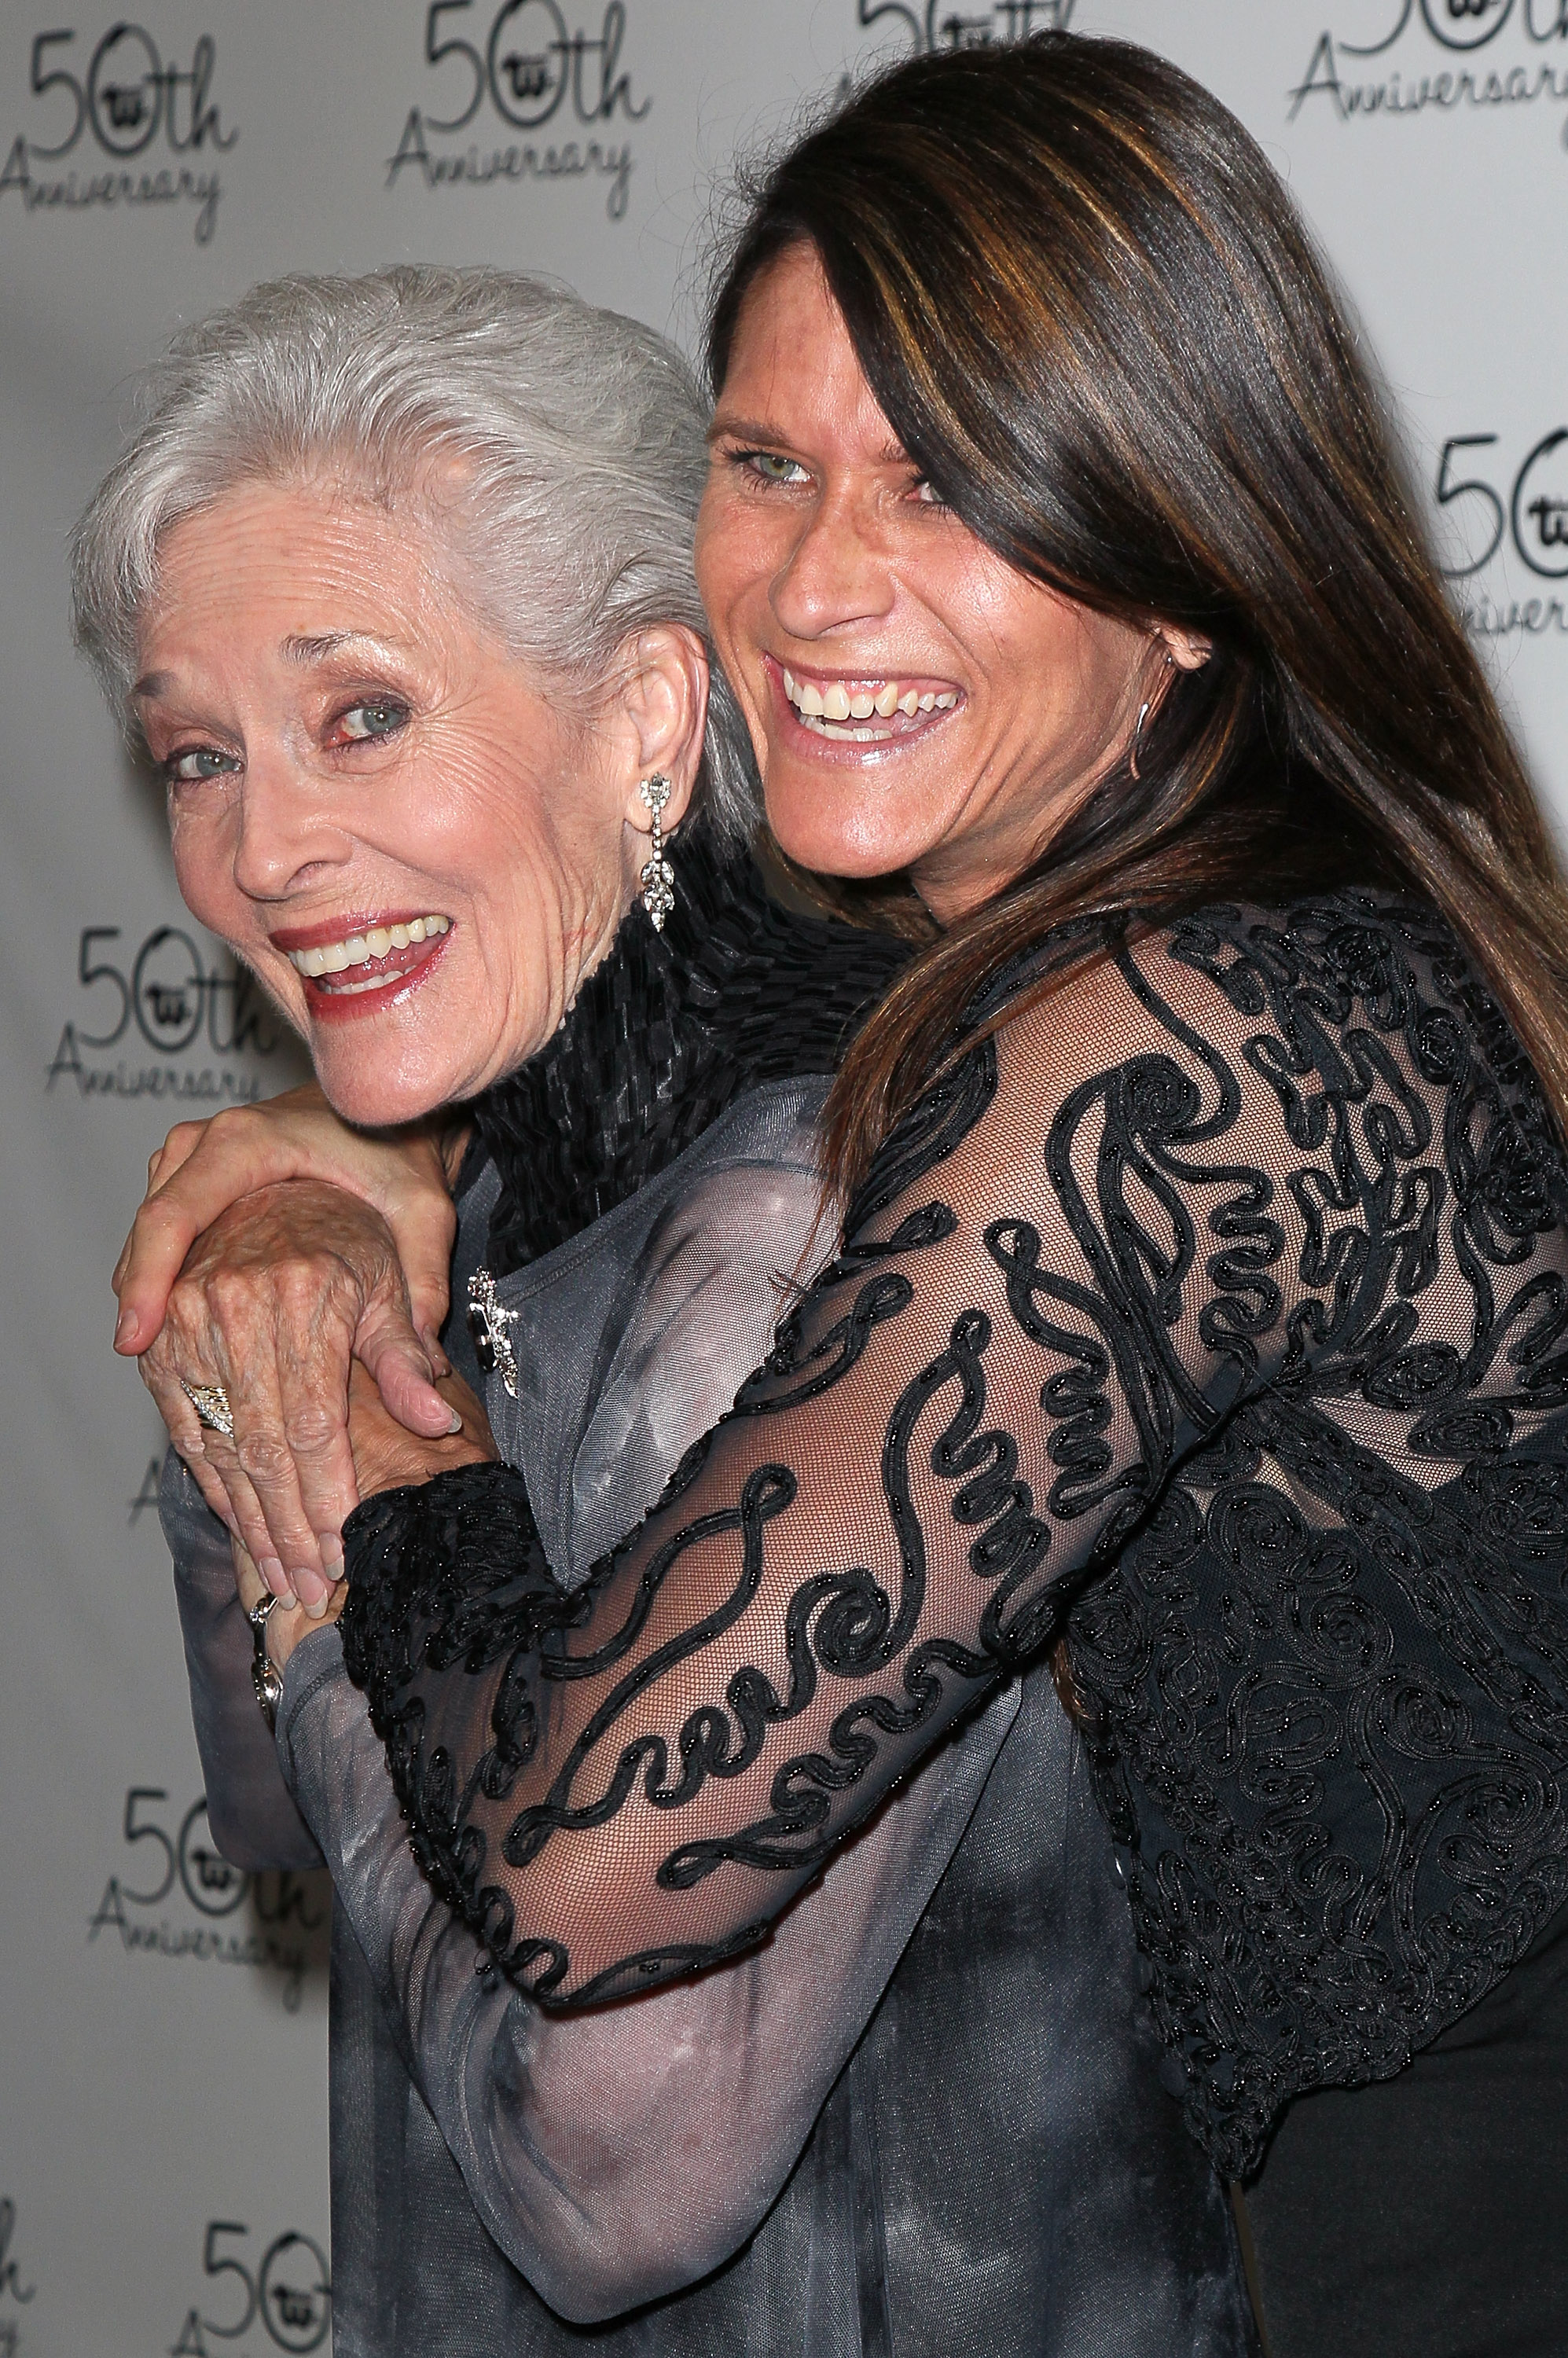 Actress Lee Meriwether and daughter Leslie Aletter attend Theatre West's 50th Anniversary Gala at Taglyan Cultural Complex on September 13, 2012, in Hollywood, California. | Source: Getty Images